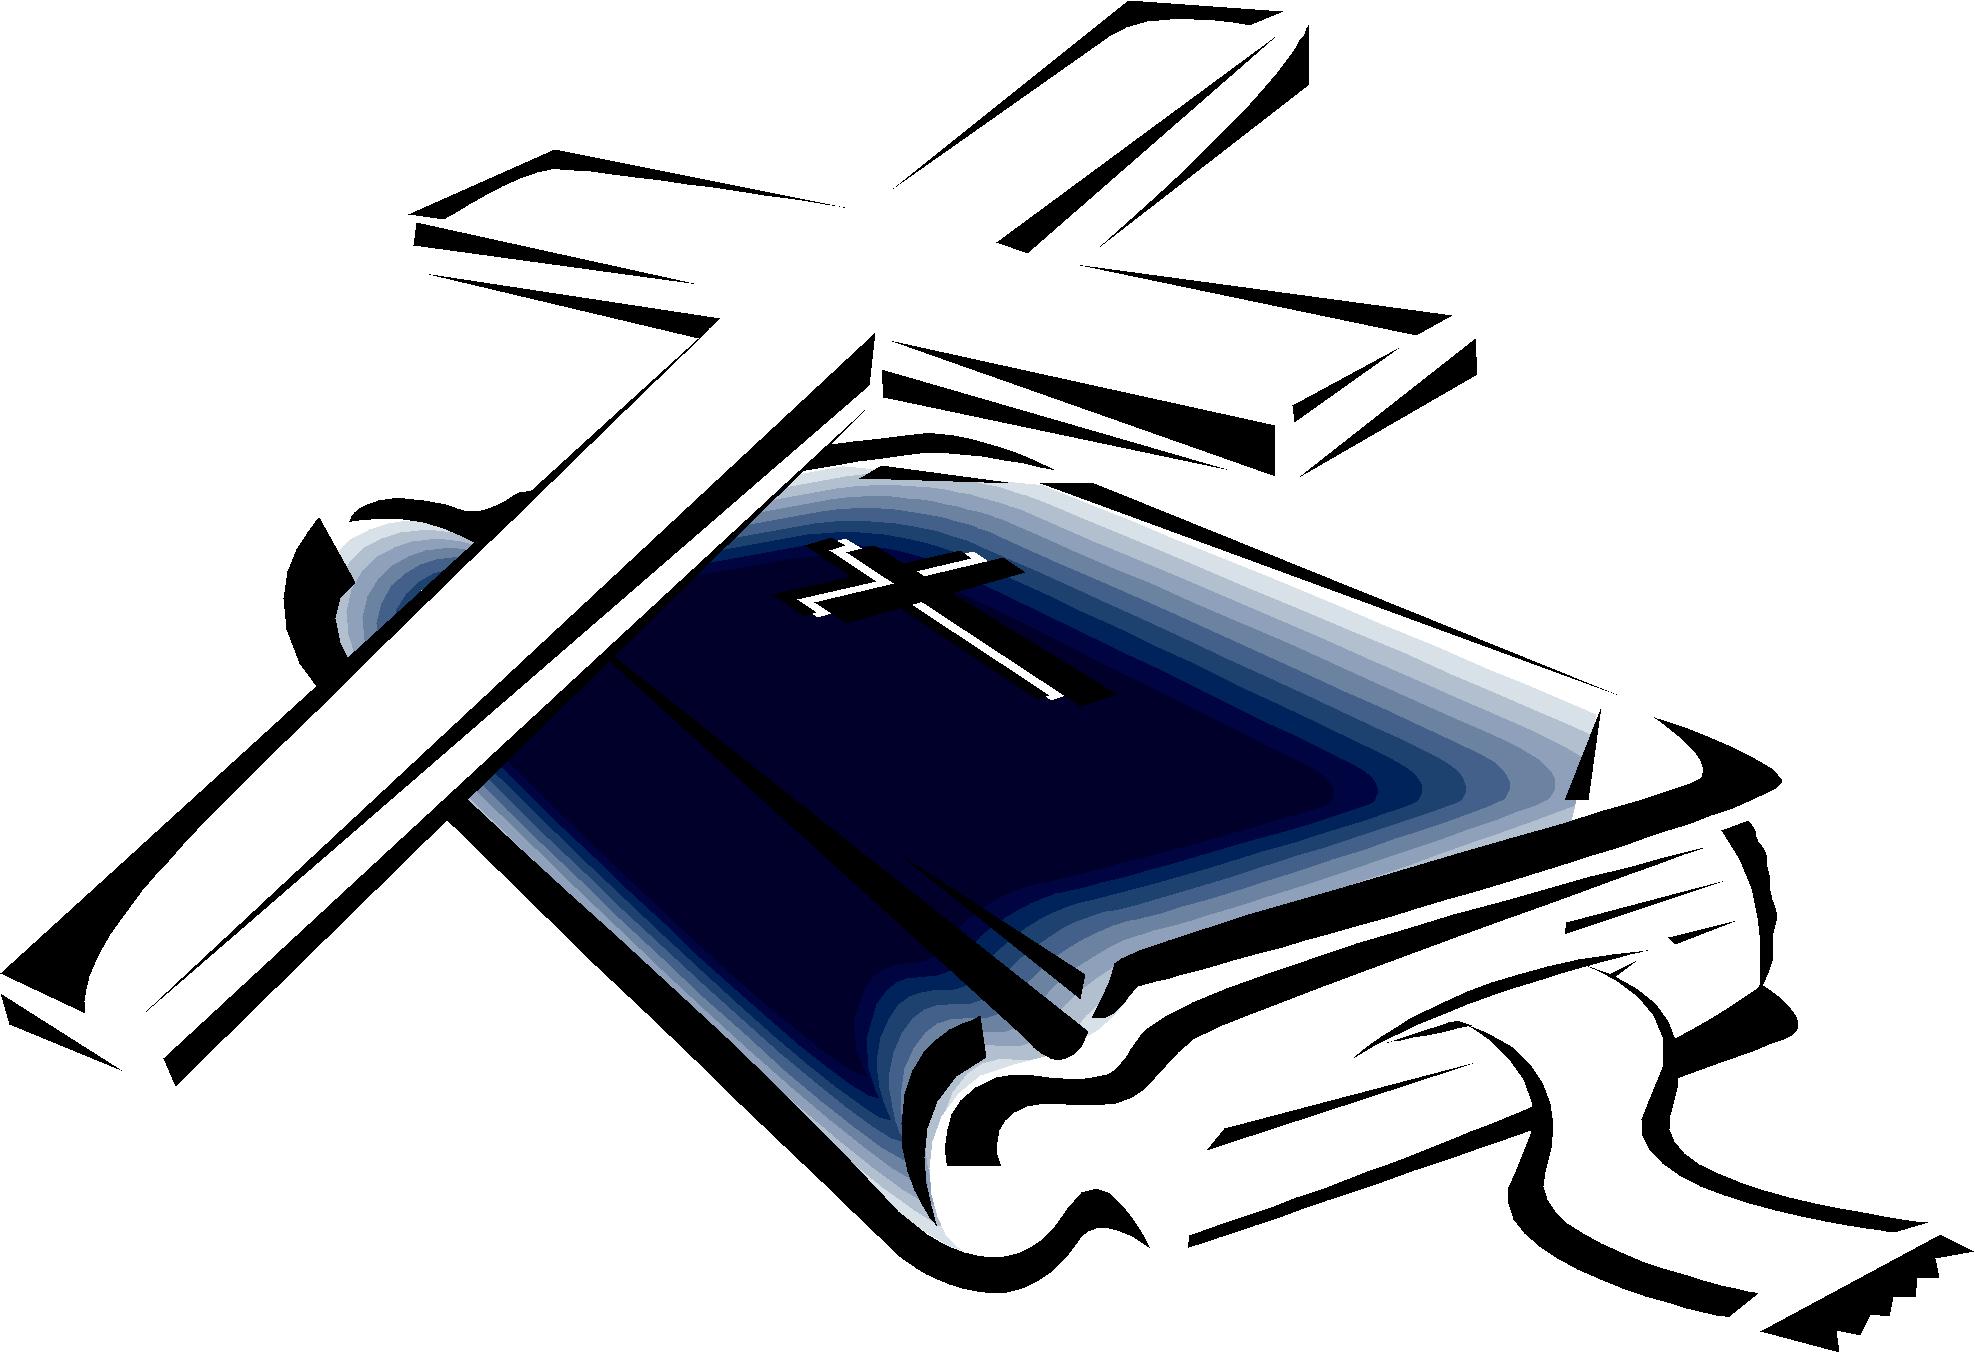 Clipart cross and bible